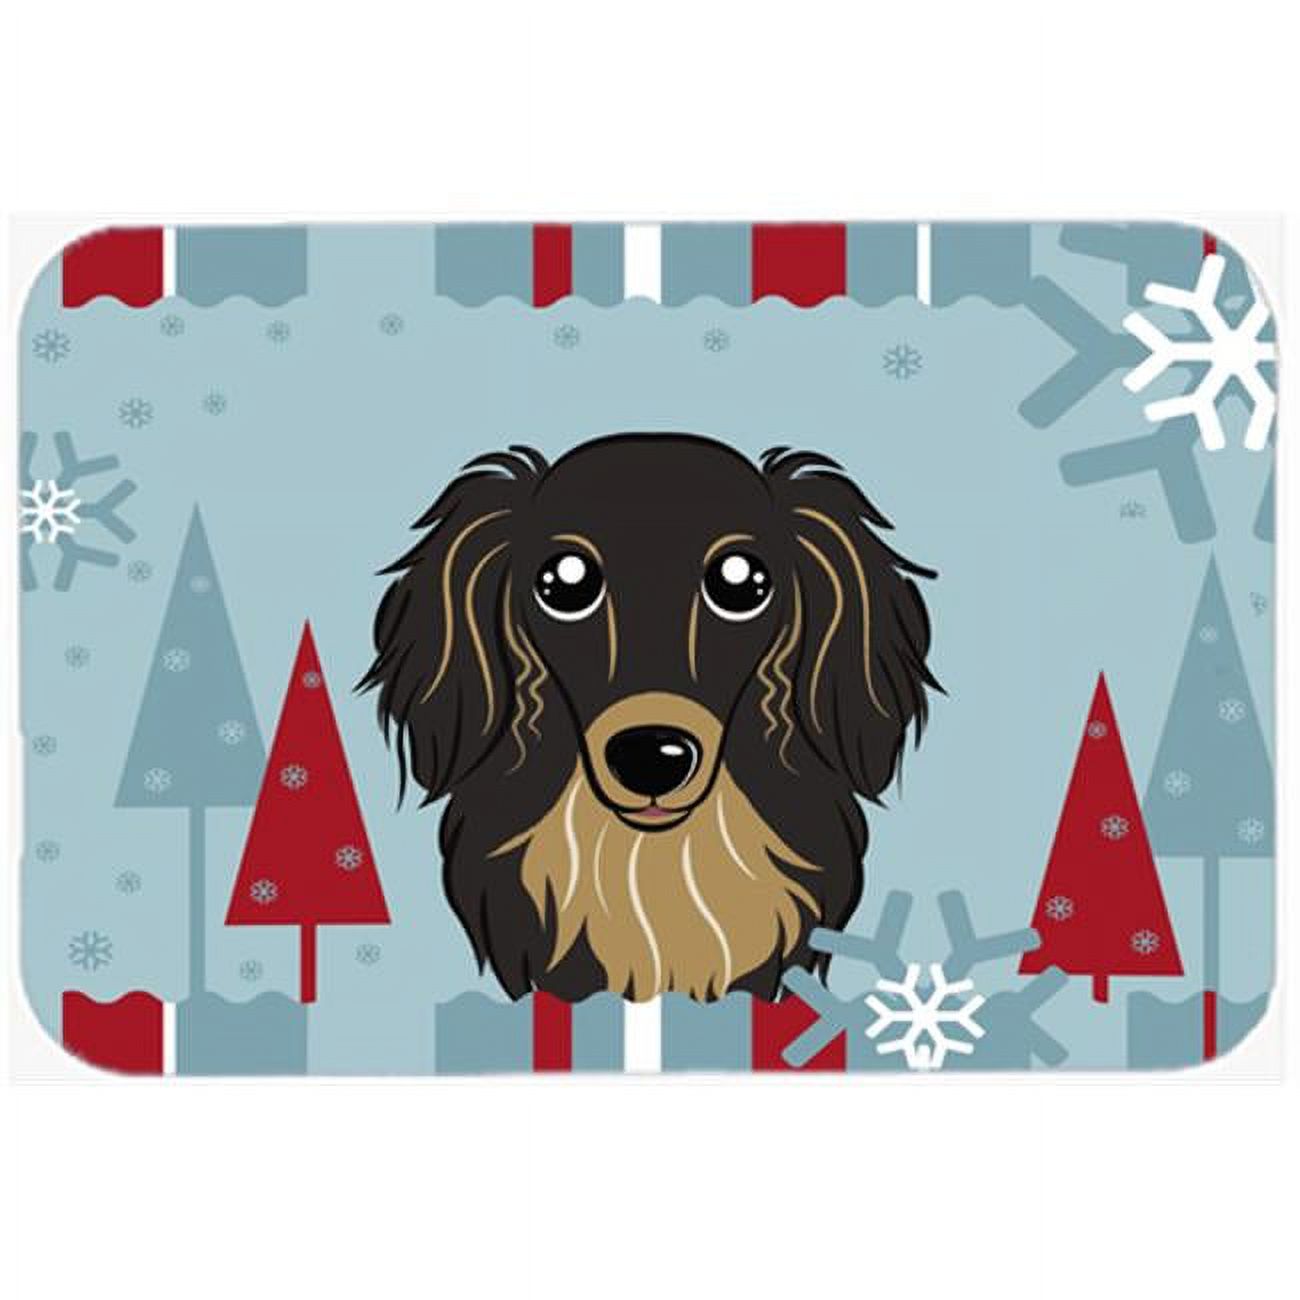 Winter Holiday Longhair Black And Tan Dachshund Mouse Pad, Hot Pad & Trivet - image 1 of 1